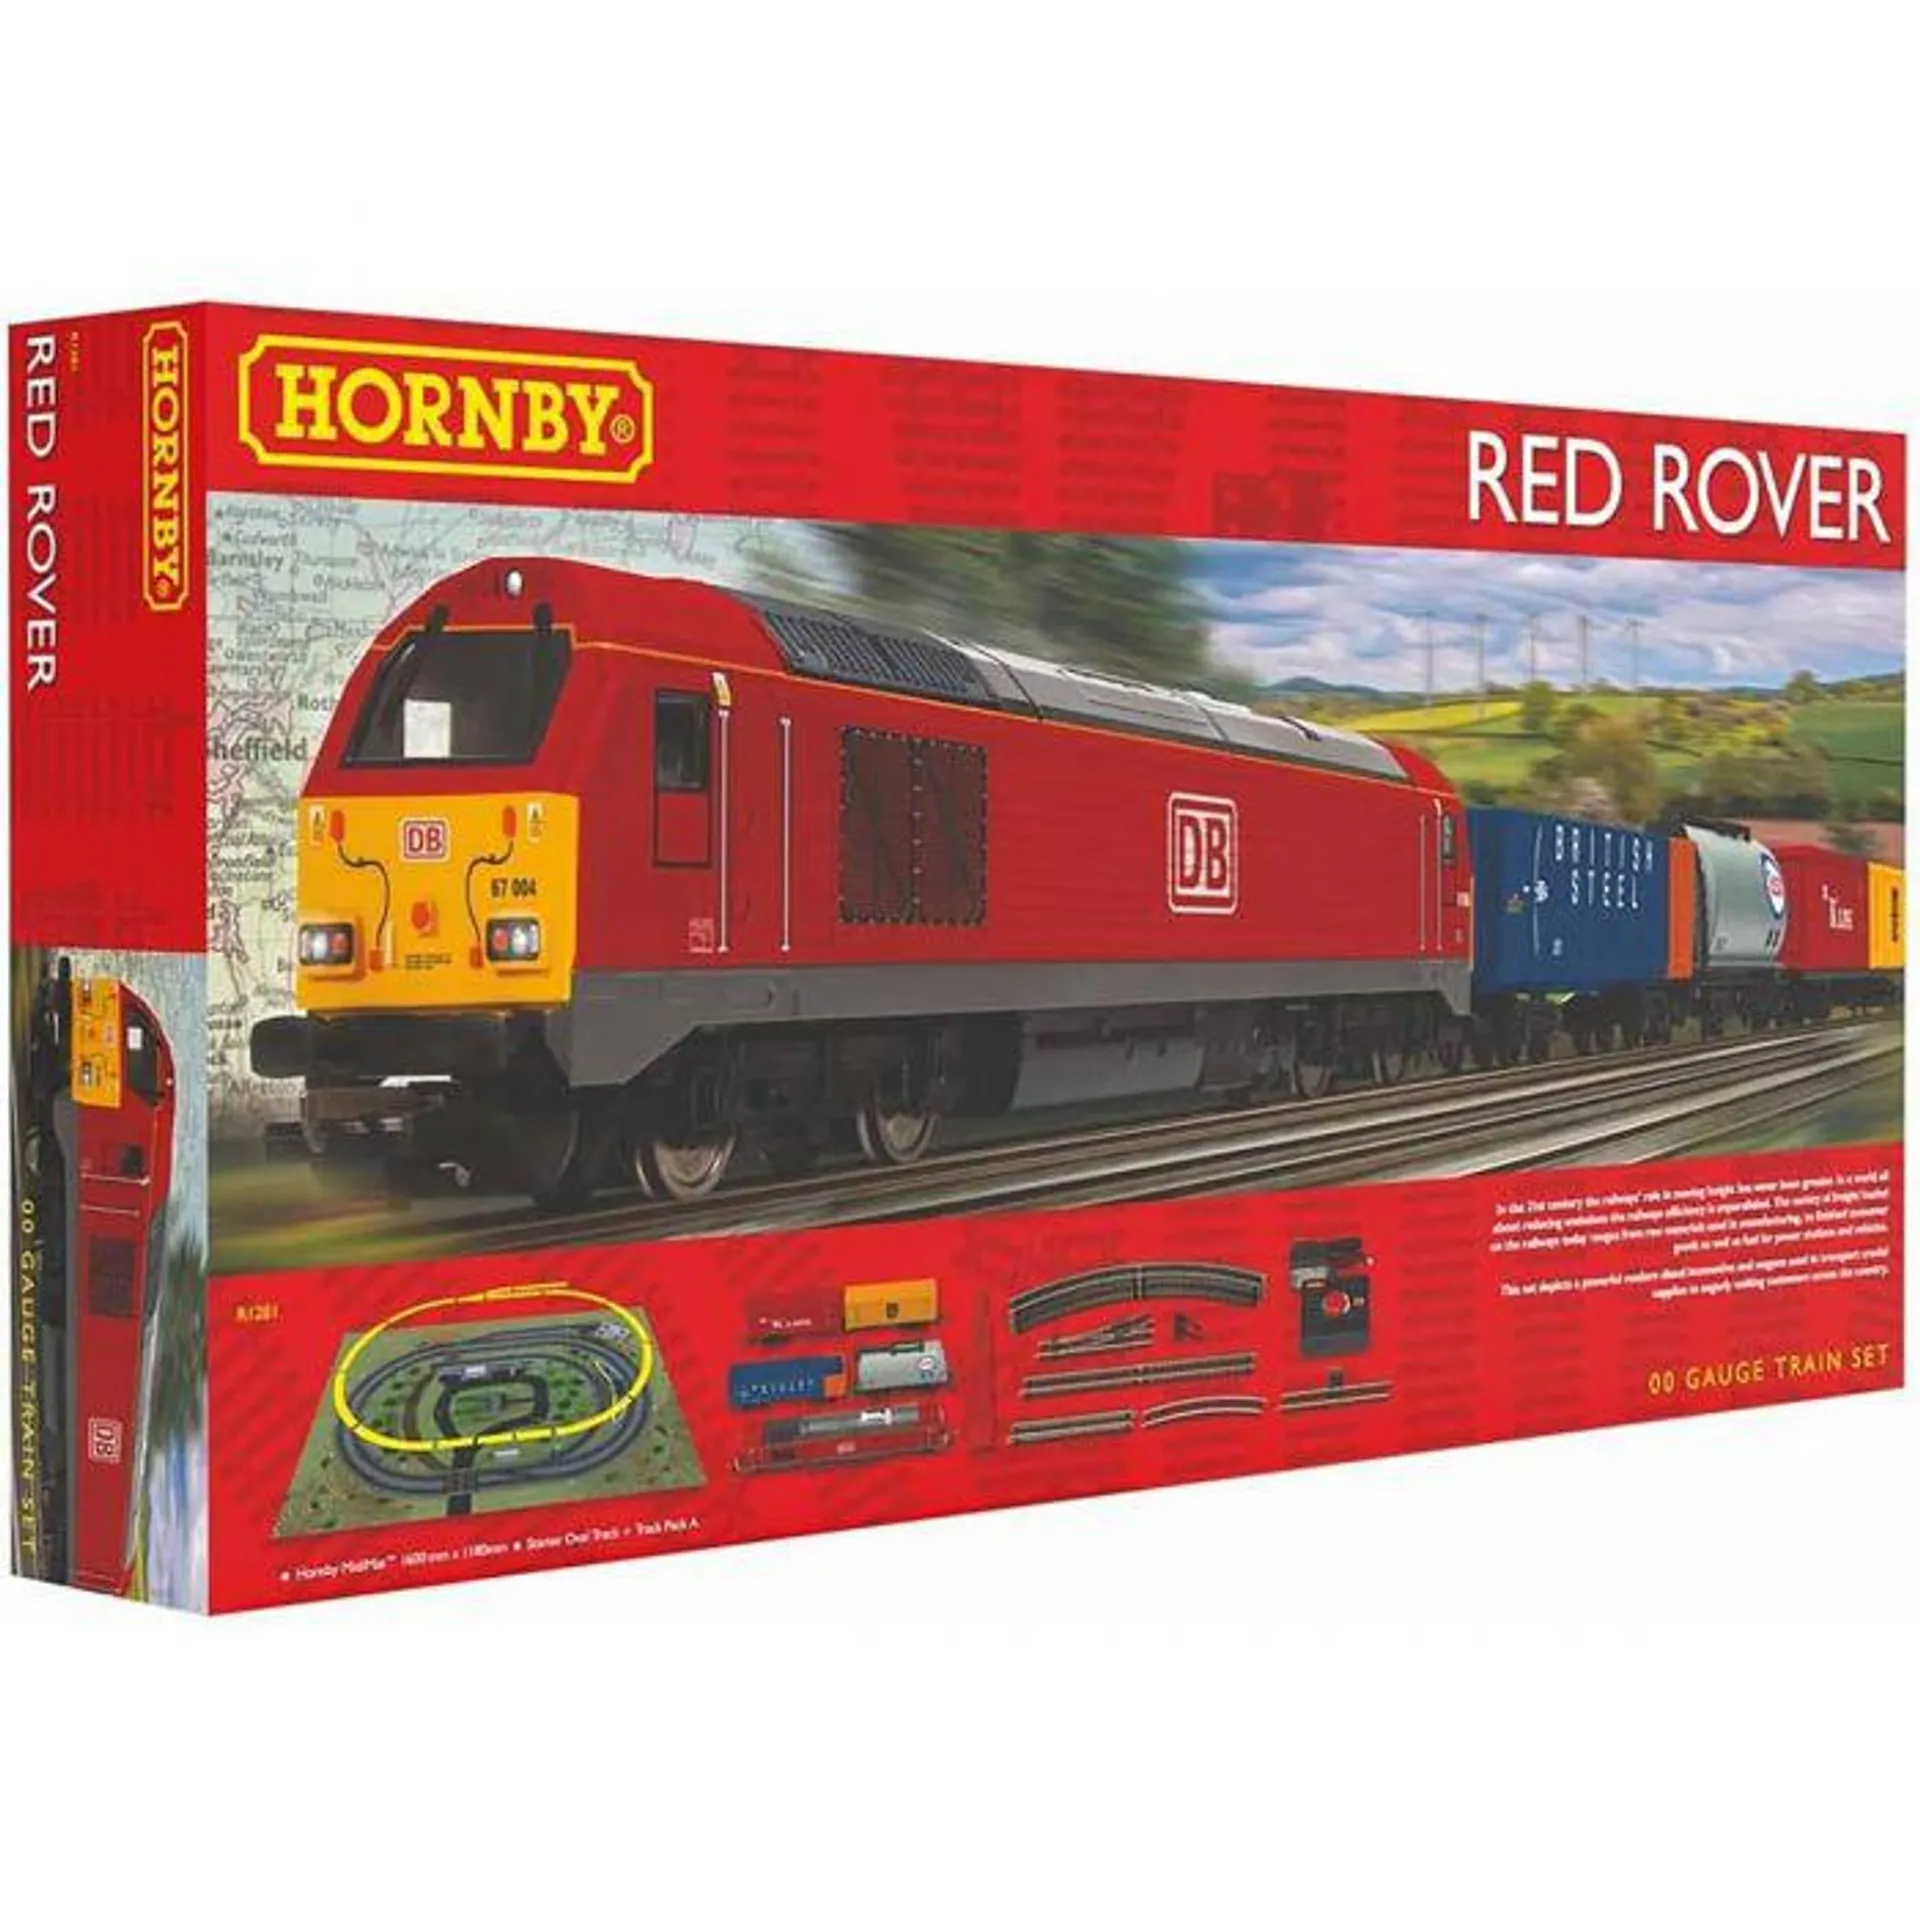 Hornby Red Rover Train Set